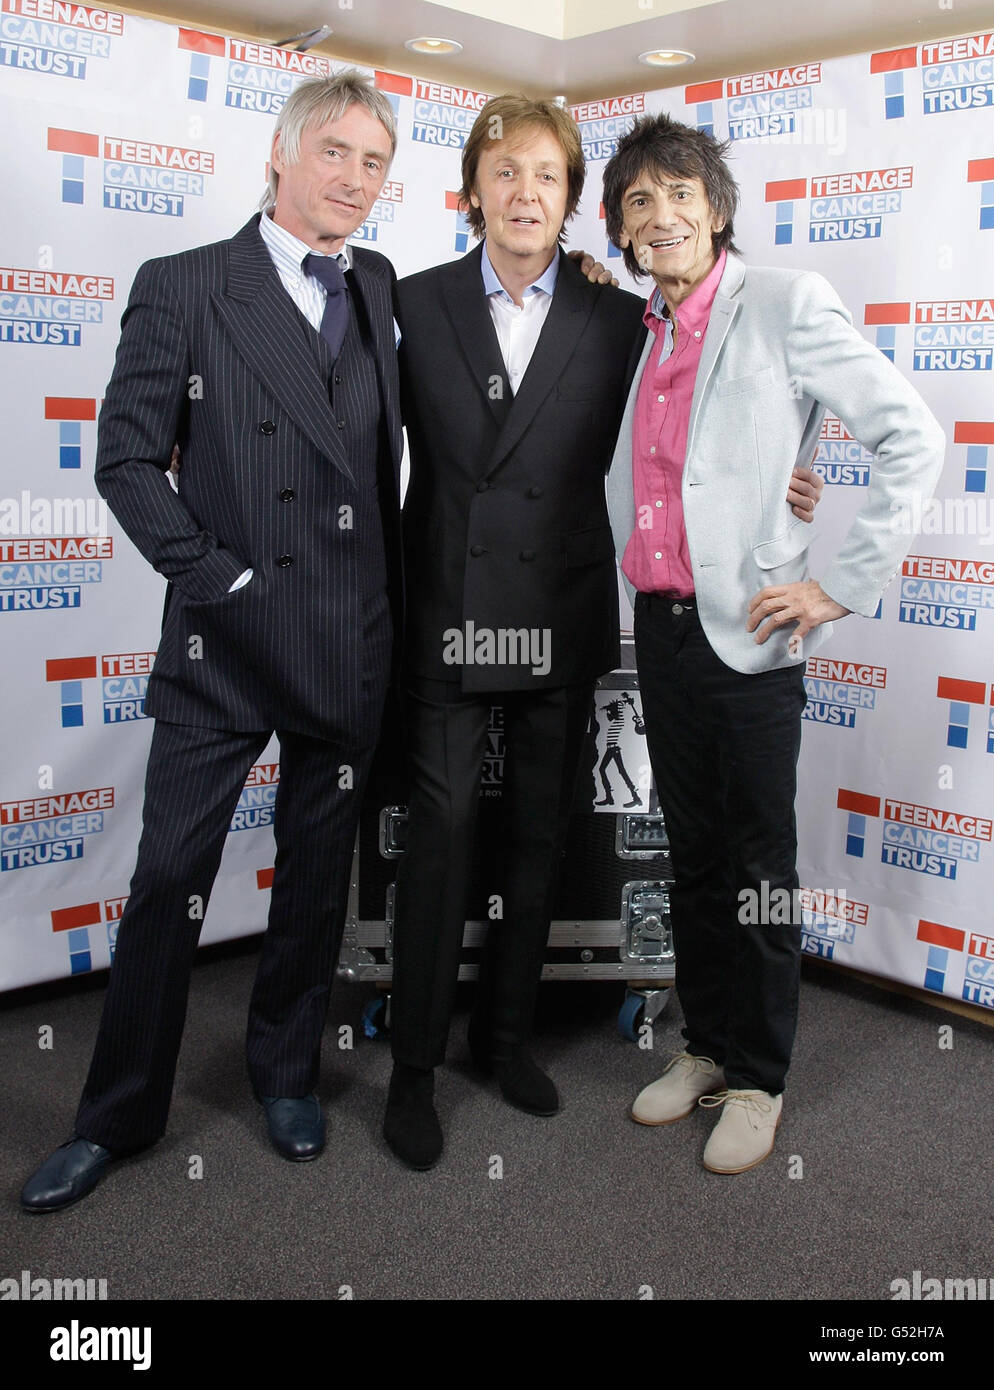 (Lef - right) Paul Weller, Sir Paul McCartney and Ronnie Wood backstage at a Teenage Cancer Trust gig at the Royal Albert Hall, London. Stock Photo